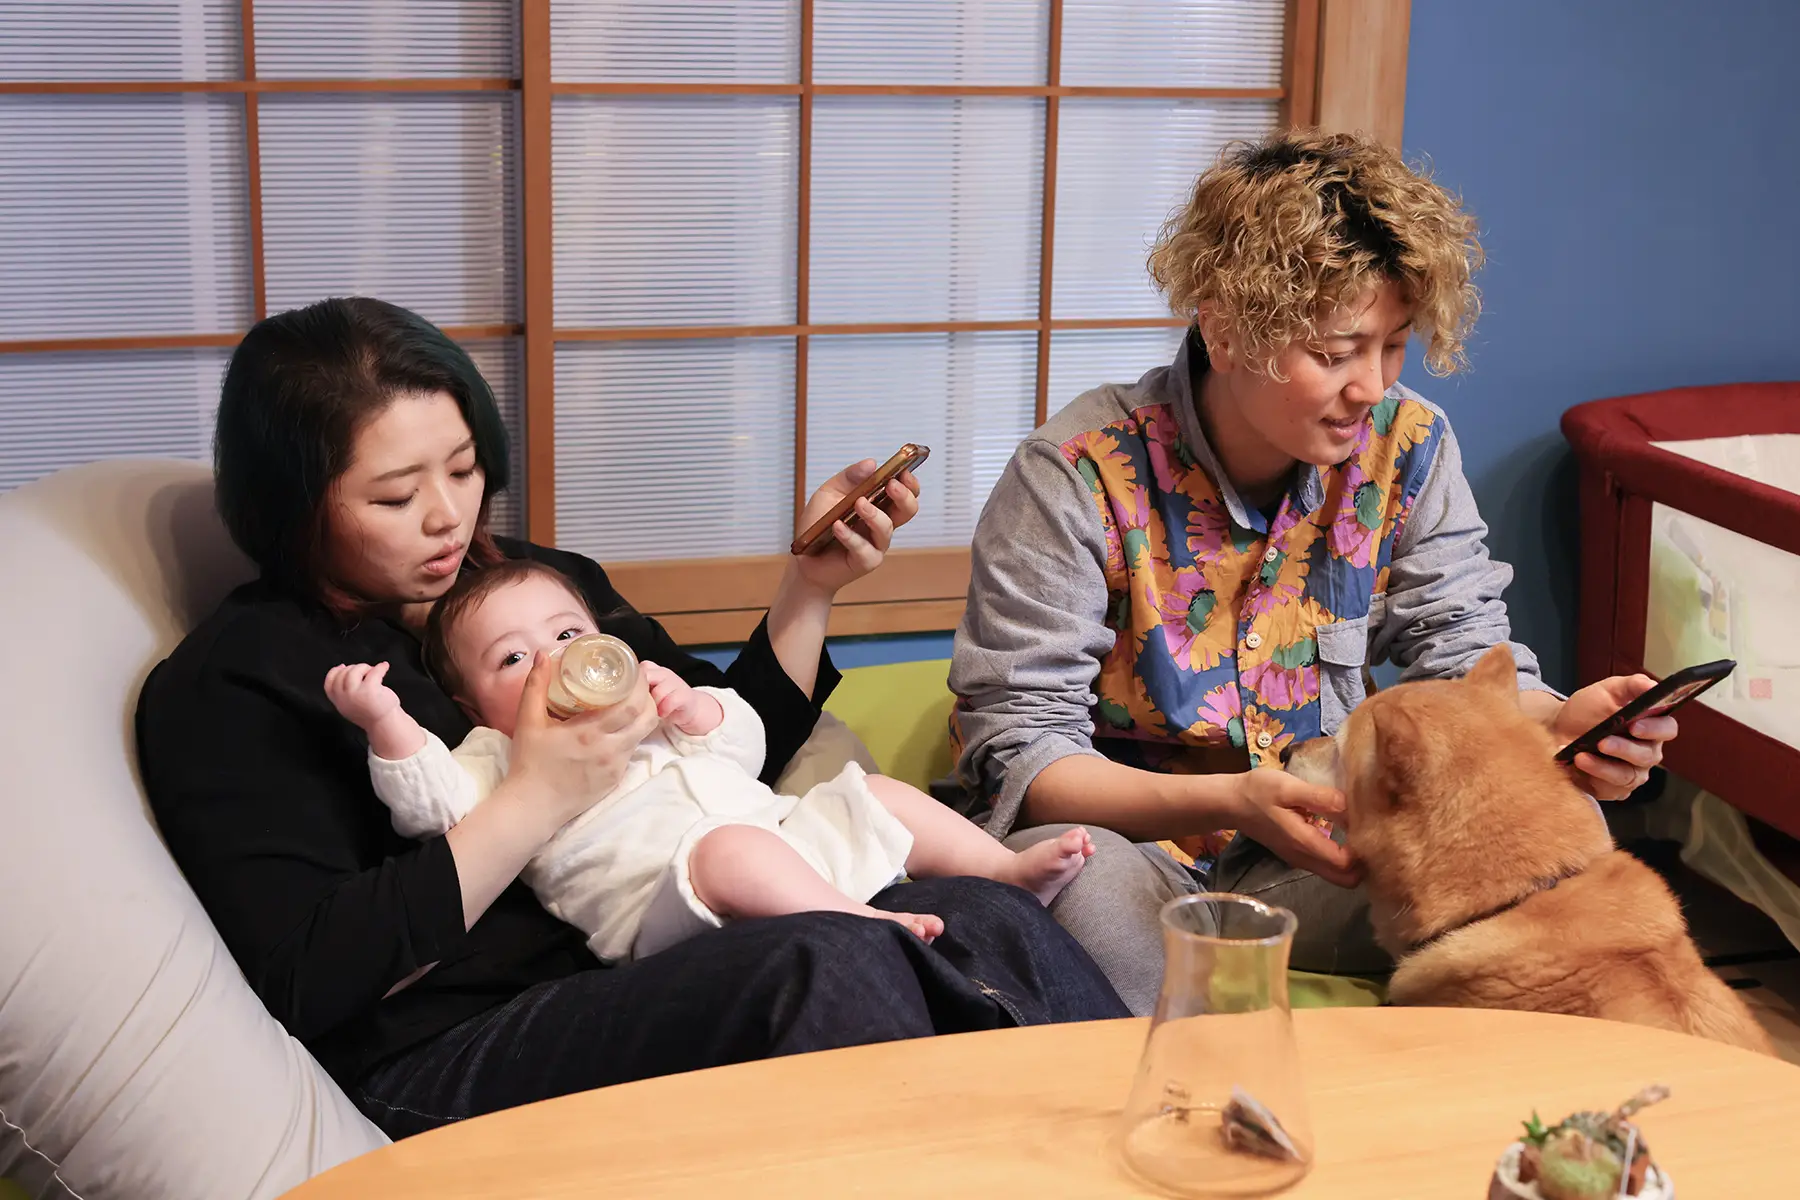 A couple from the LGBTQ community (two mums) bottle feeding their baby in their living room